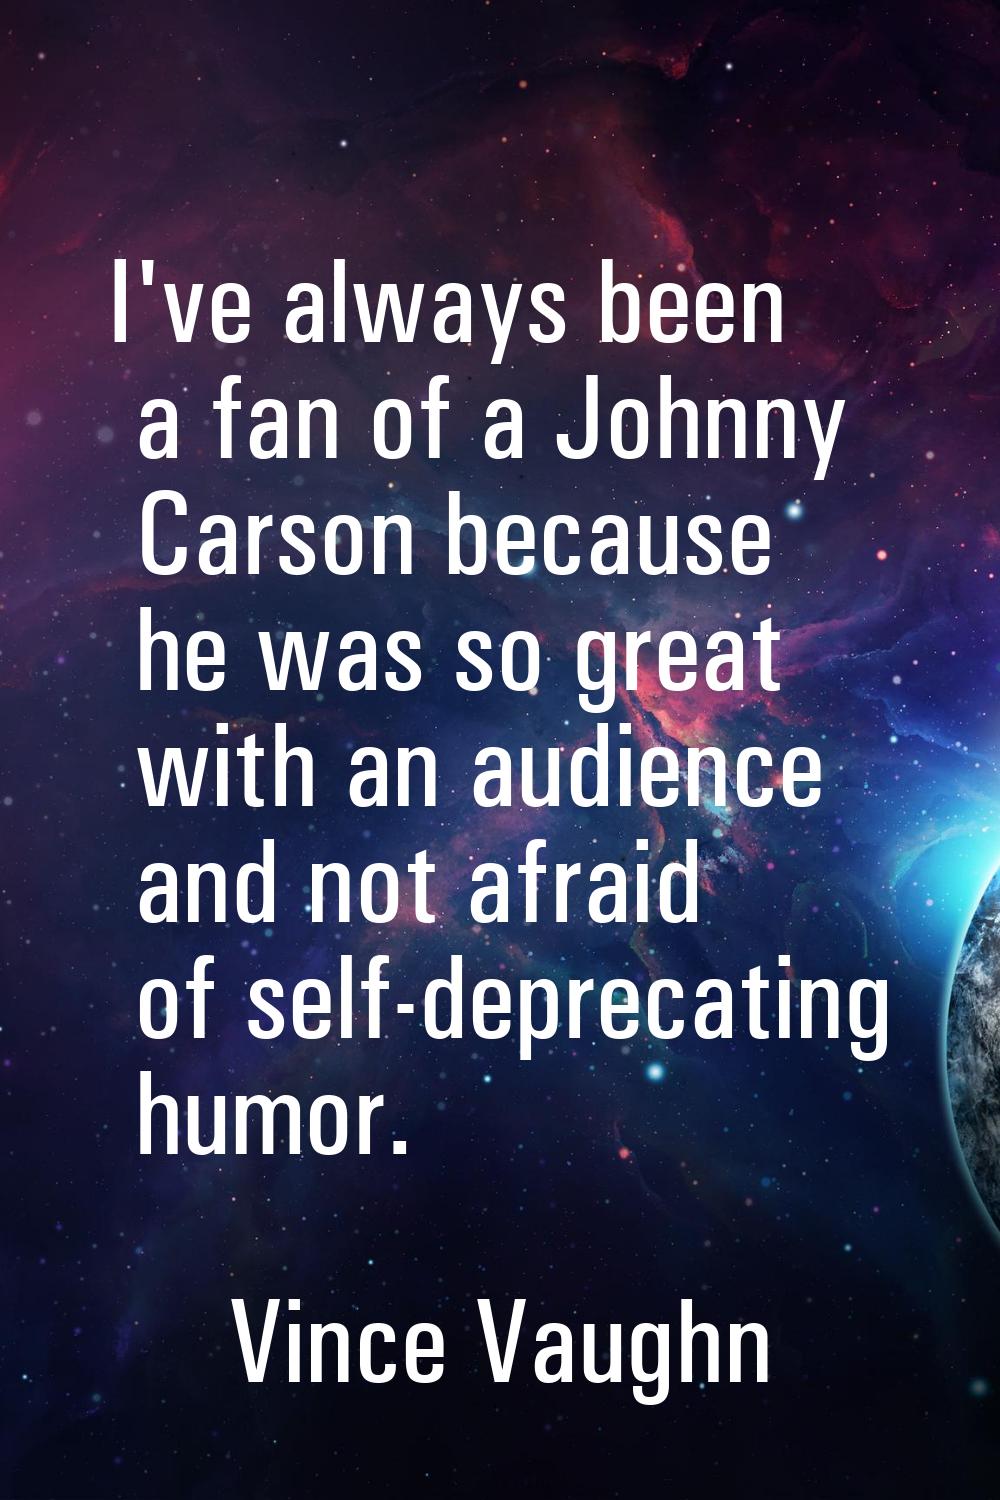 I've always been a fan of a Johnny Carson because he was so great with an audience and not afraid o